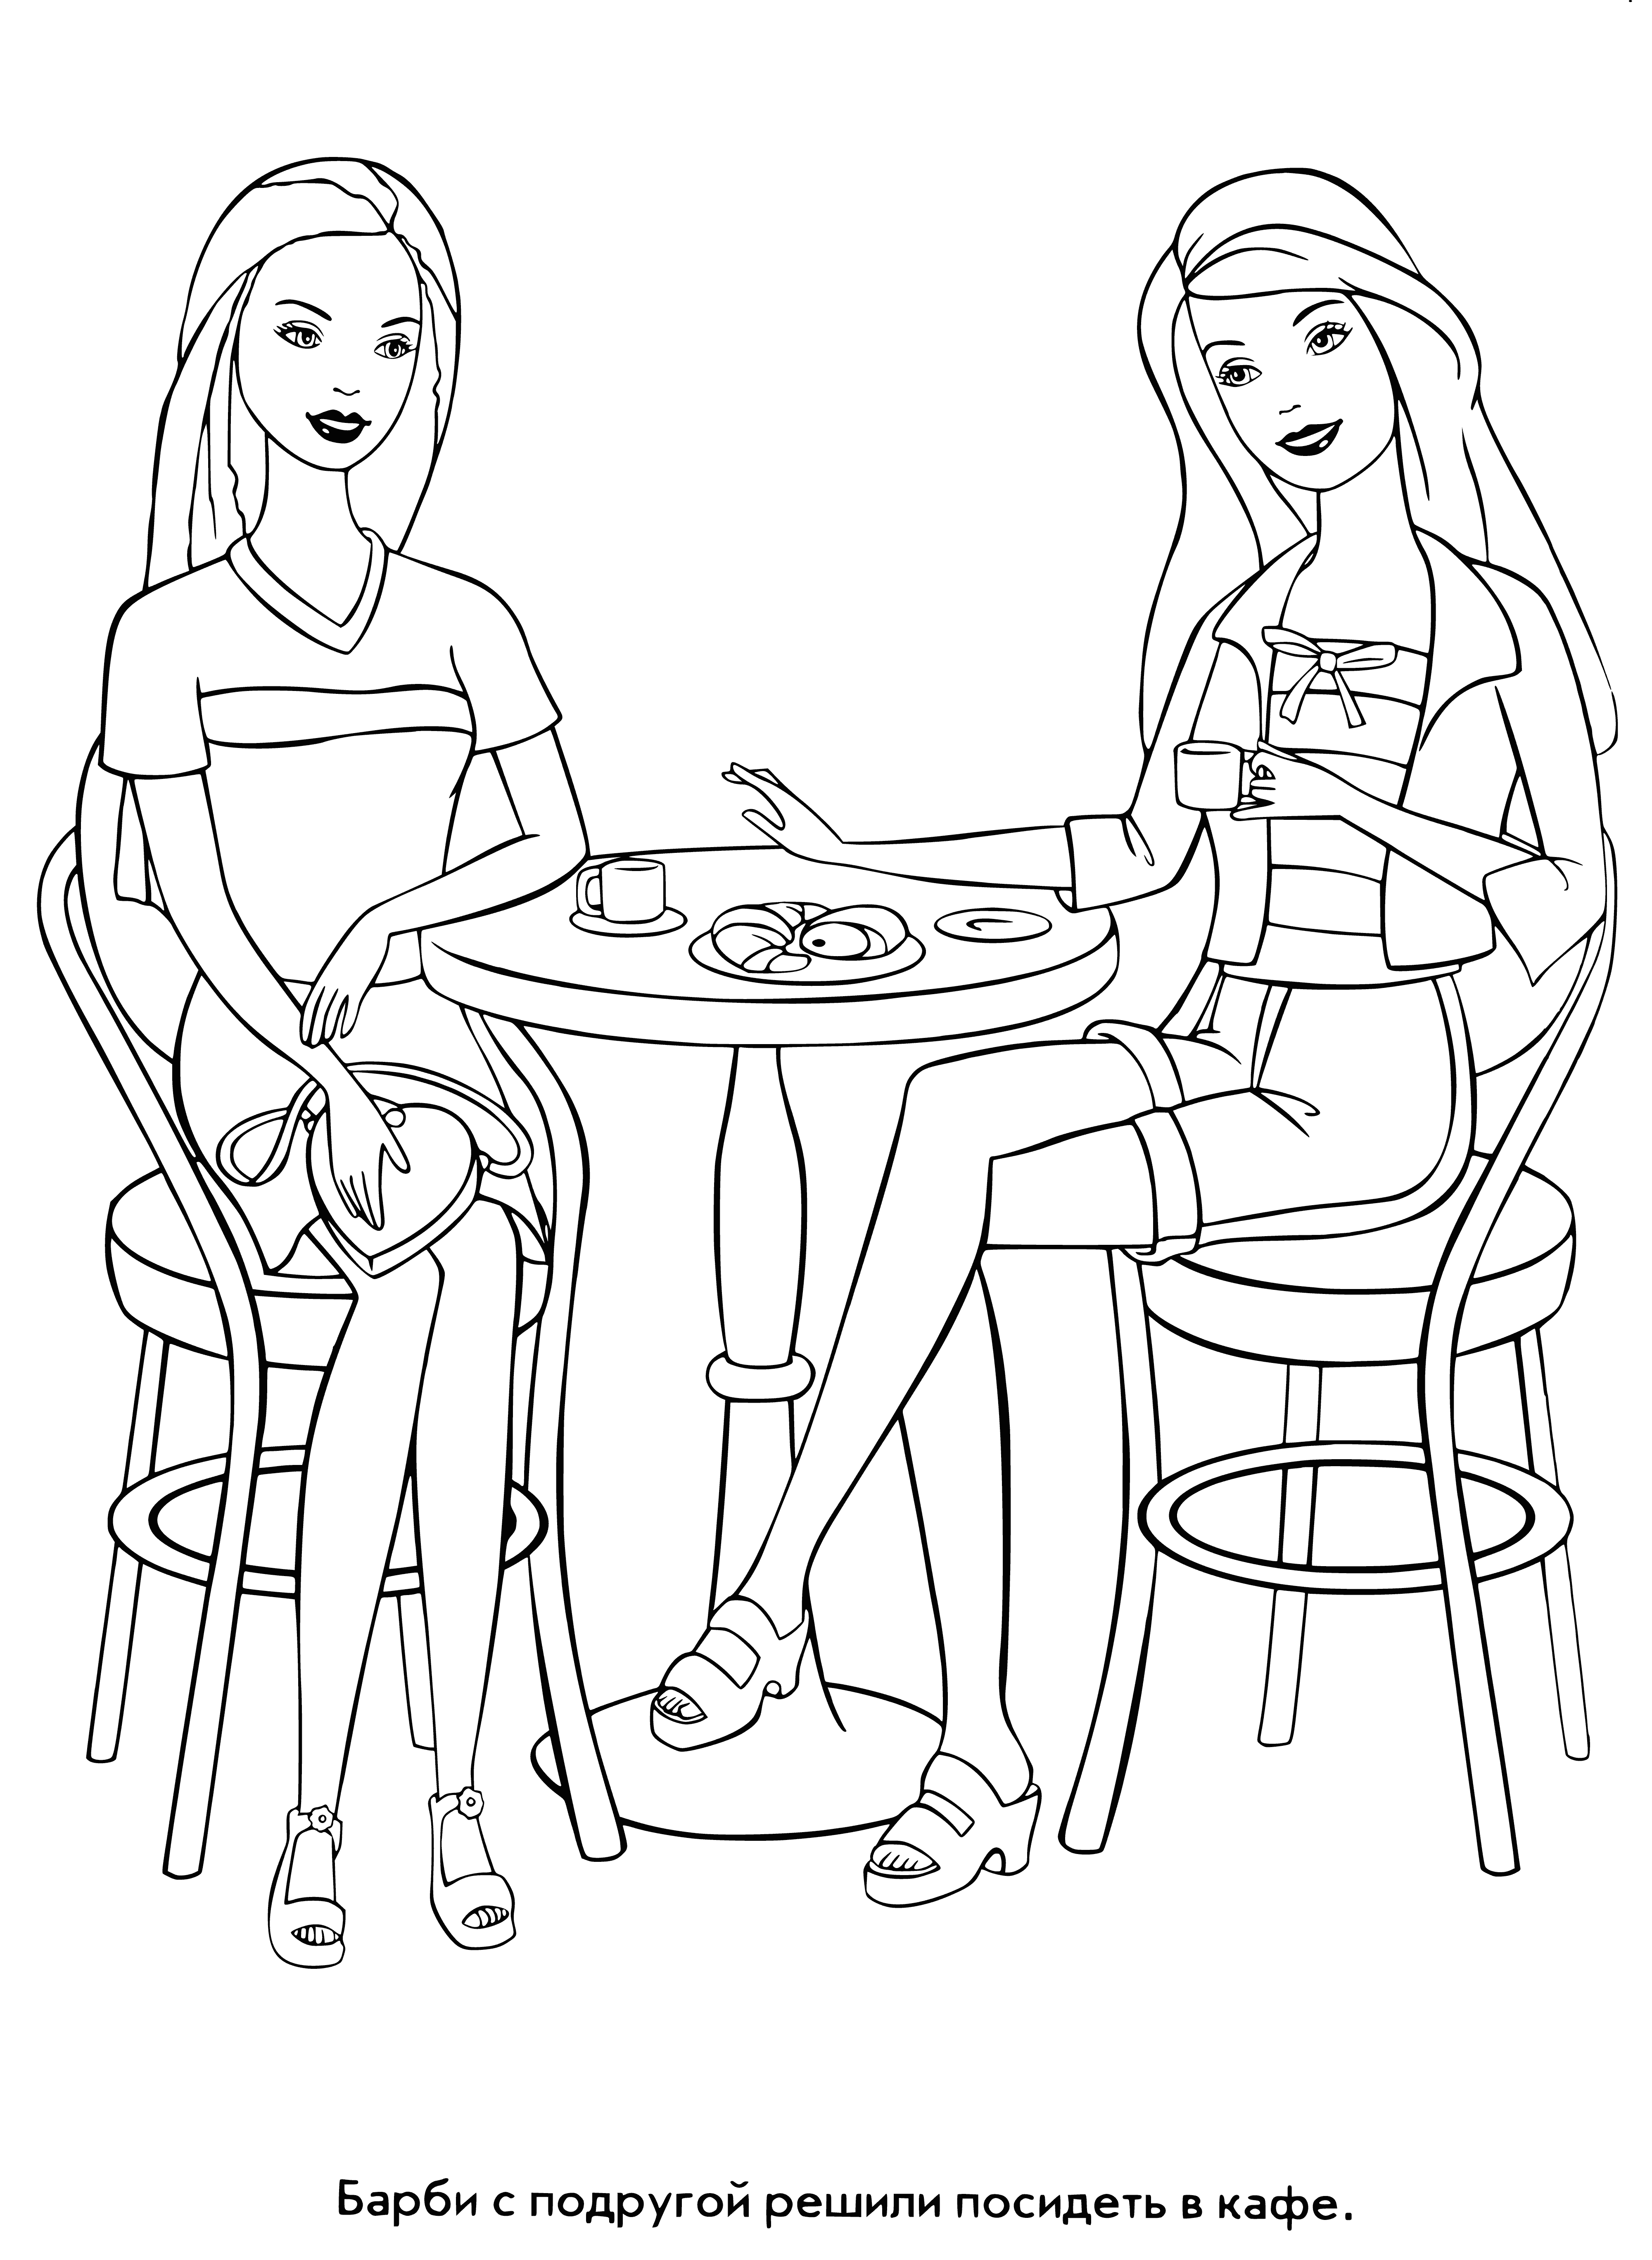 coloring page: Barbie sits at a cafe table with coffee and croissant, looking down at her phone. #coloringfun